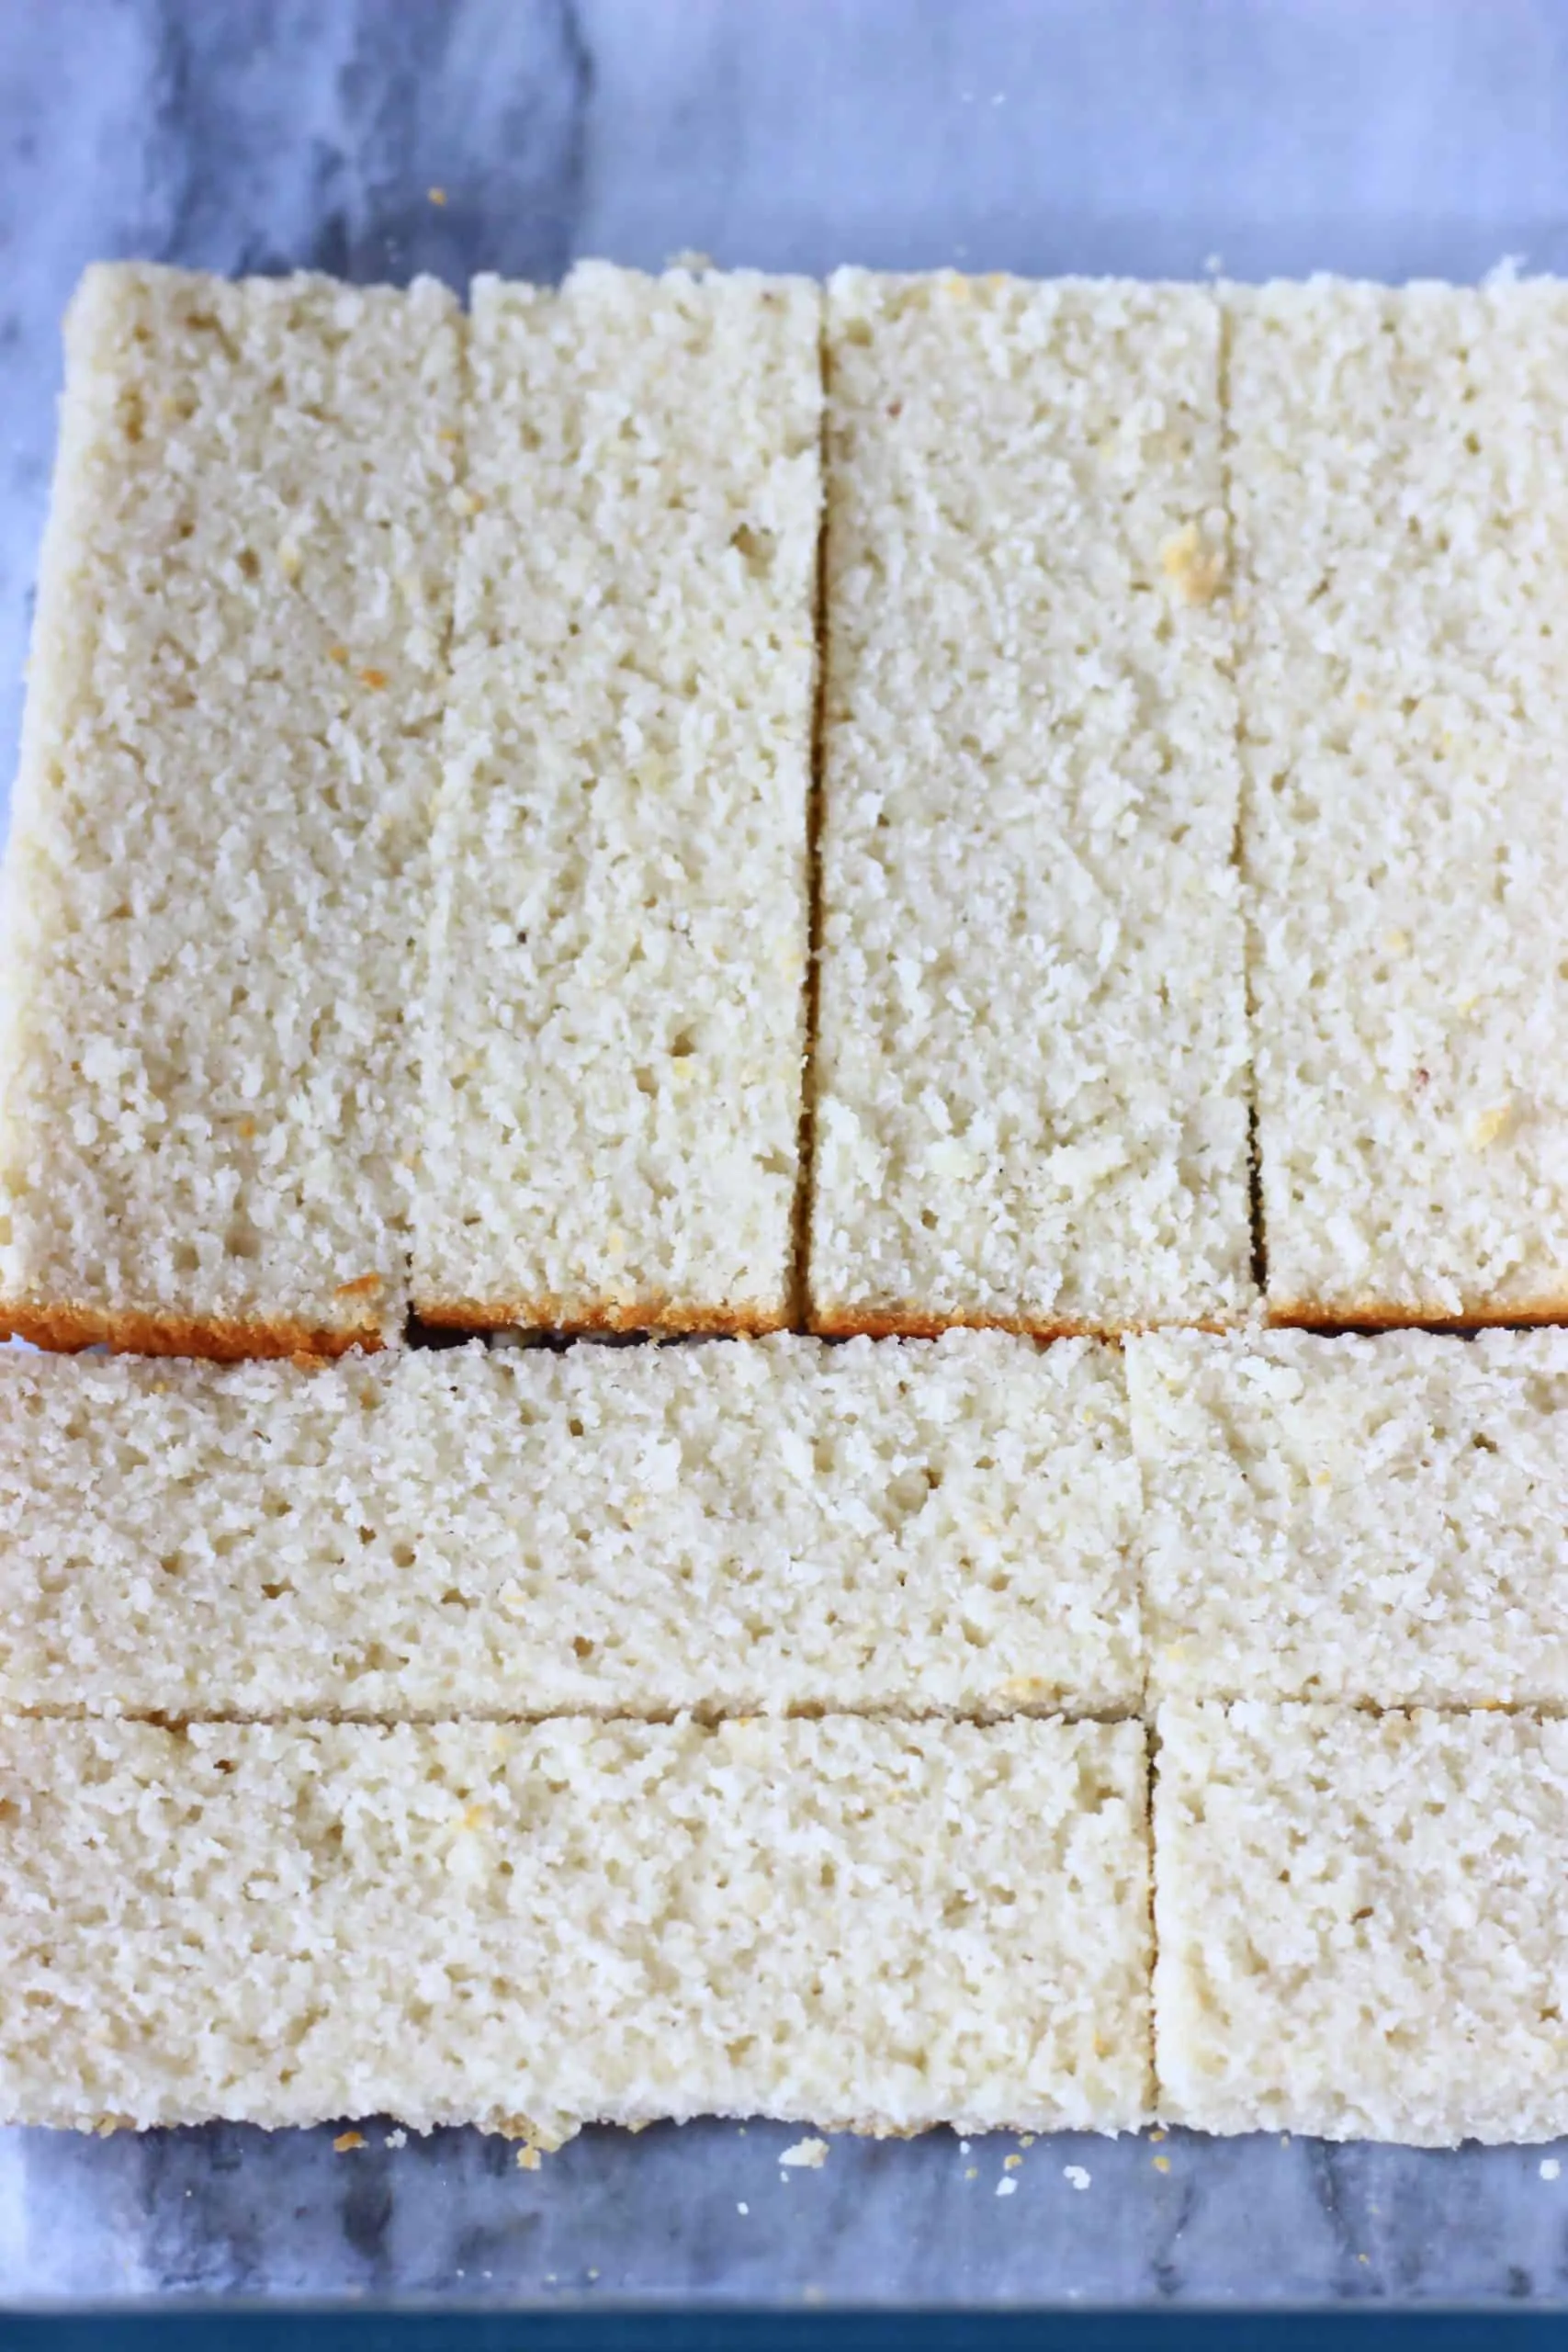 Gluten-free vegan sponge rectangles laid out along the bottom of a baking dish